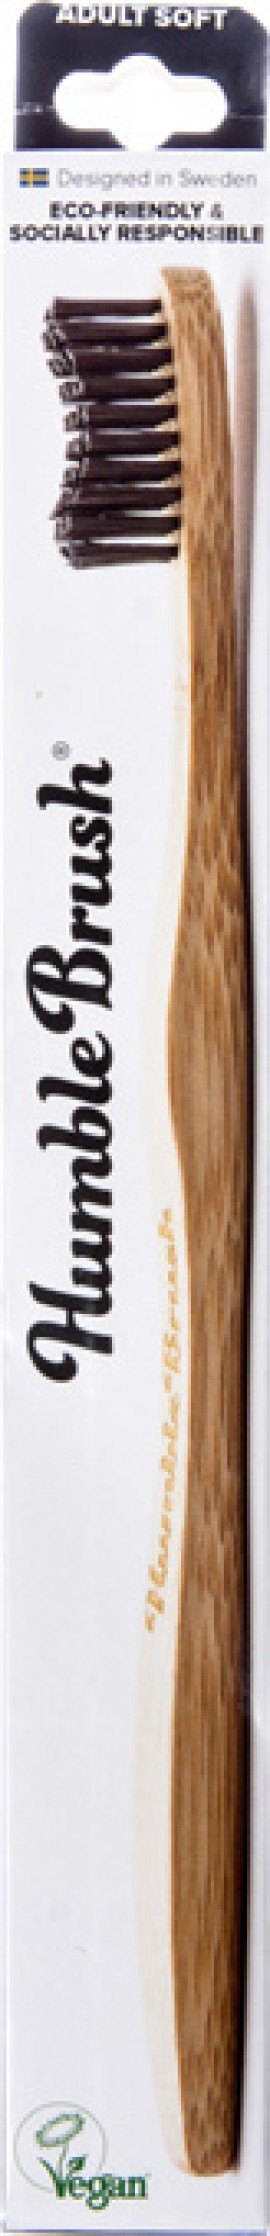 The Humble Co. Toothbrush Bamboo Black Μαύρη Οδοντόβουρτσα Απο Μπαμπού Adult Soft 1 τμχ